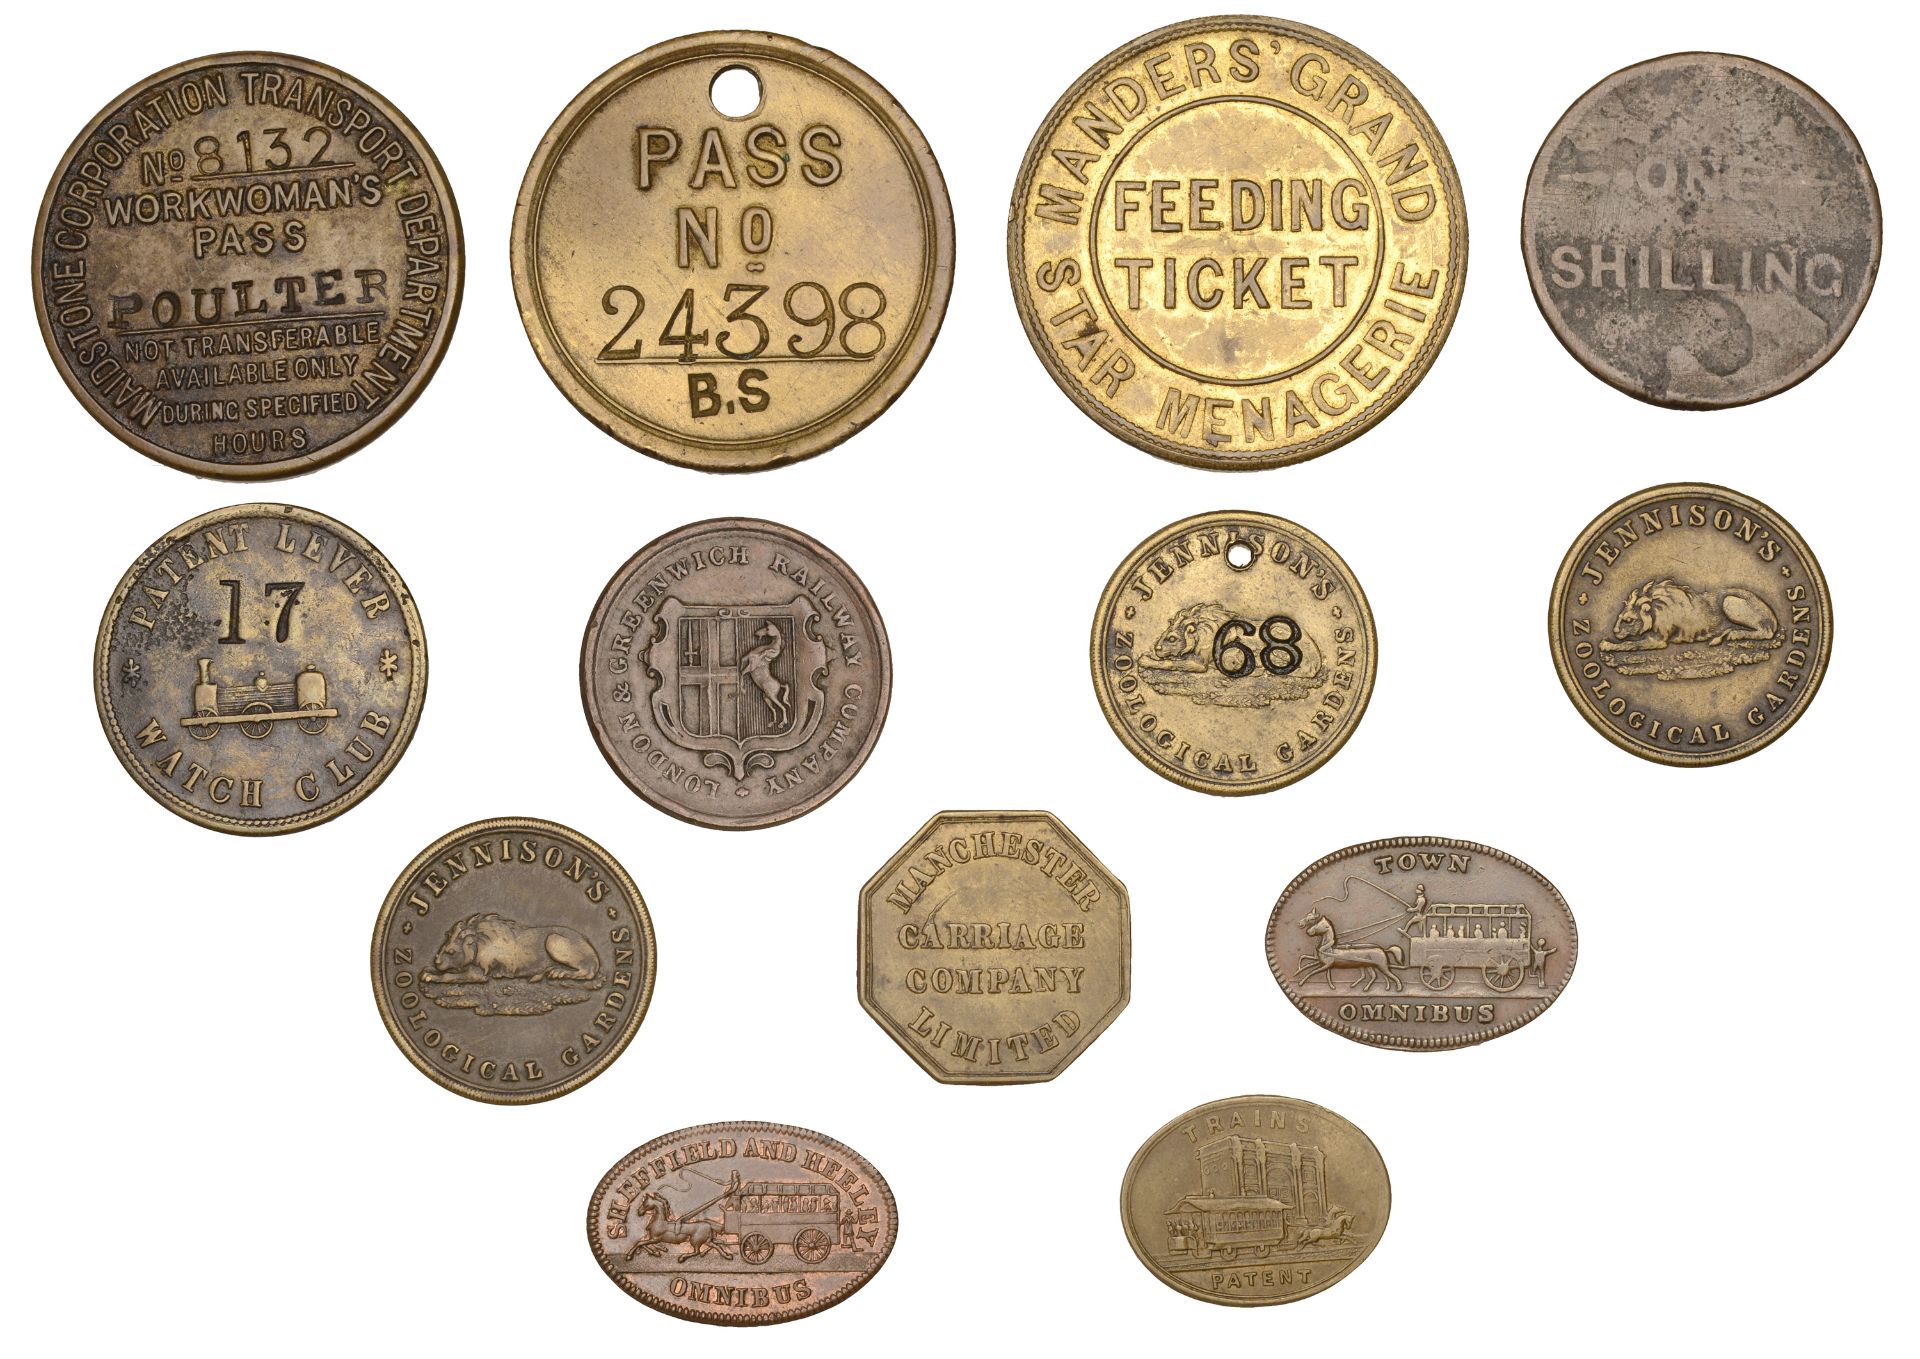 Miscellaneous Tokens and Checks, Tokens, tickets, etc, related to transport and animals (13)...